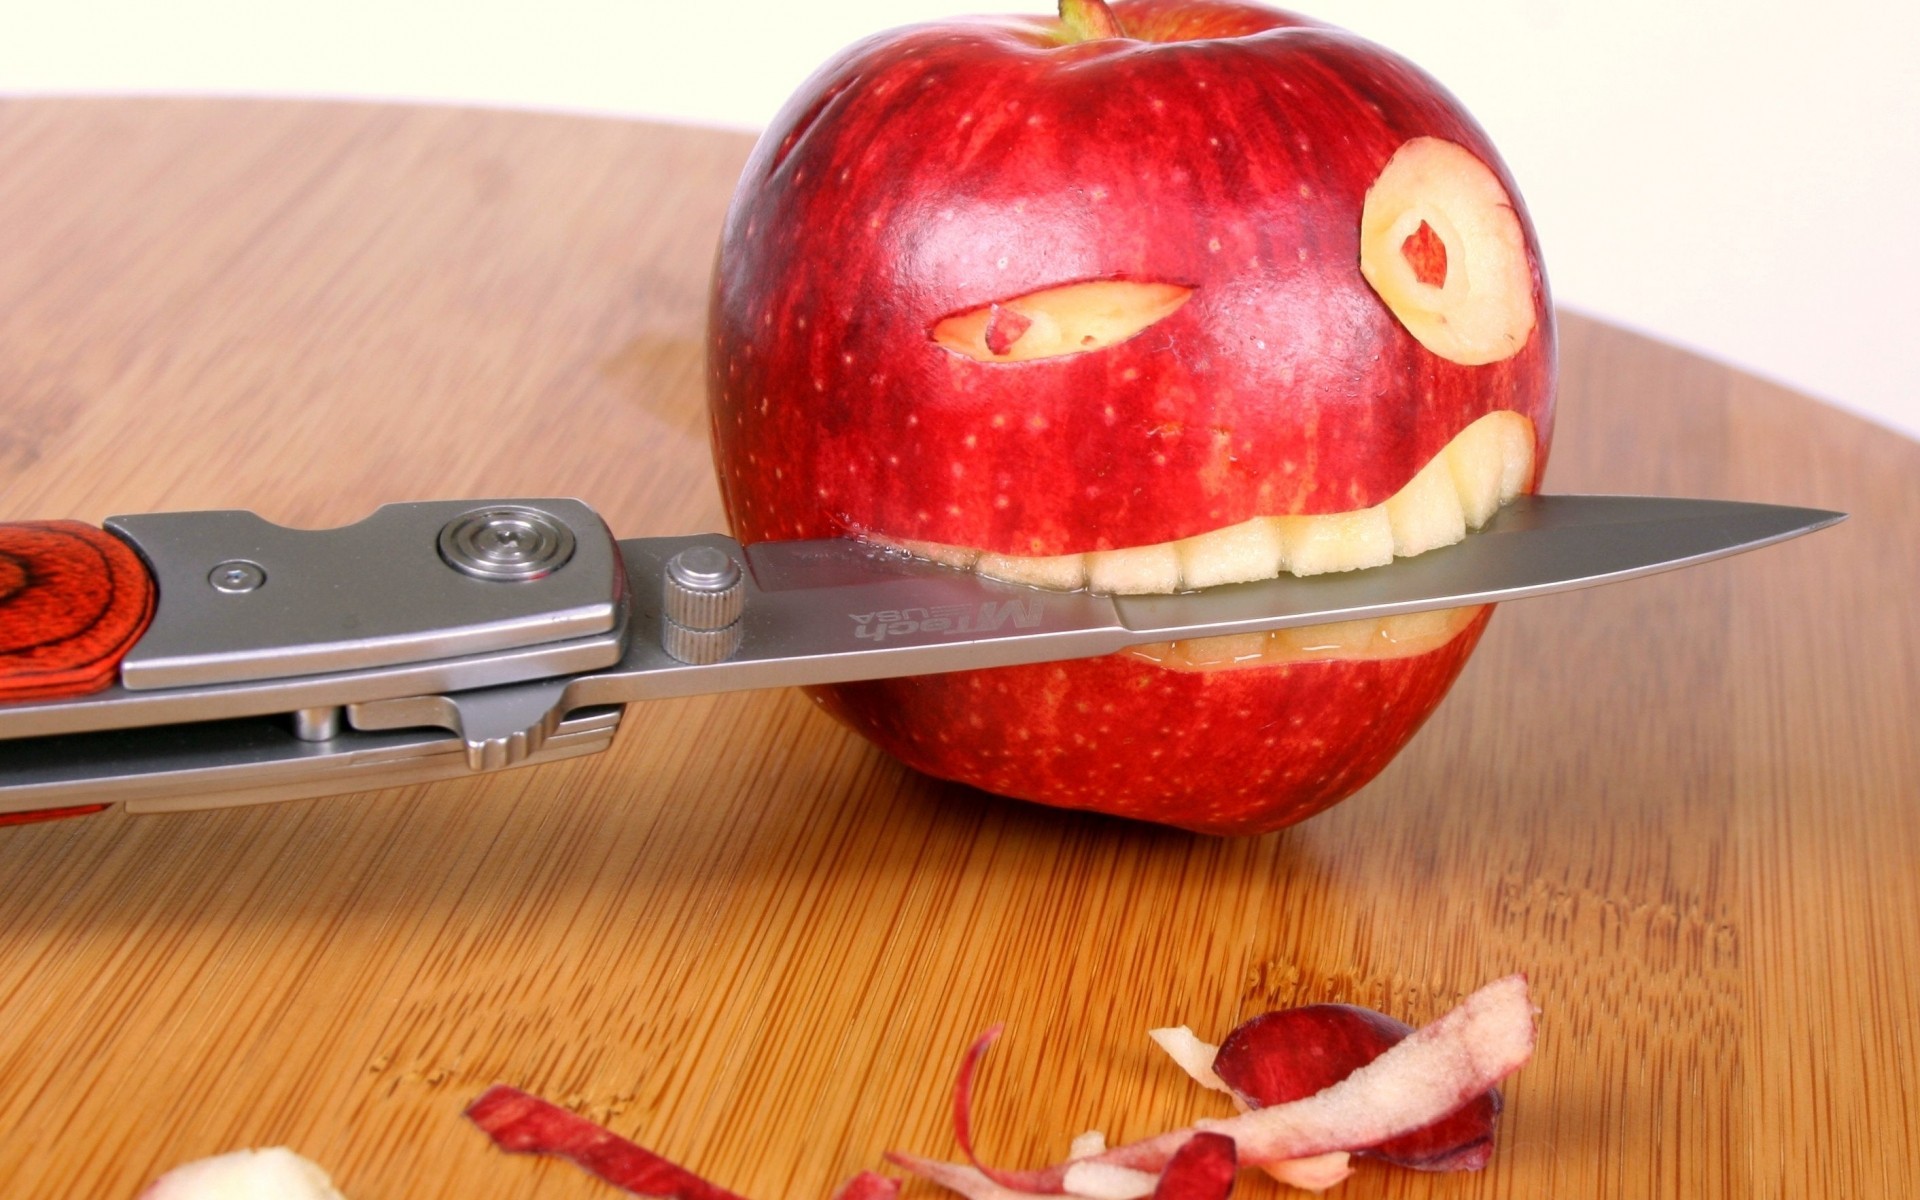 General 1920x1200 apples knife food fruit humor wood wooden table weapon wooden surface closeup